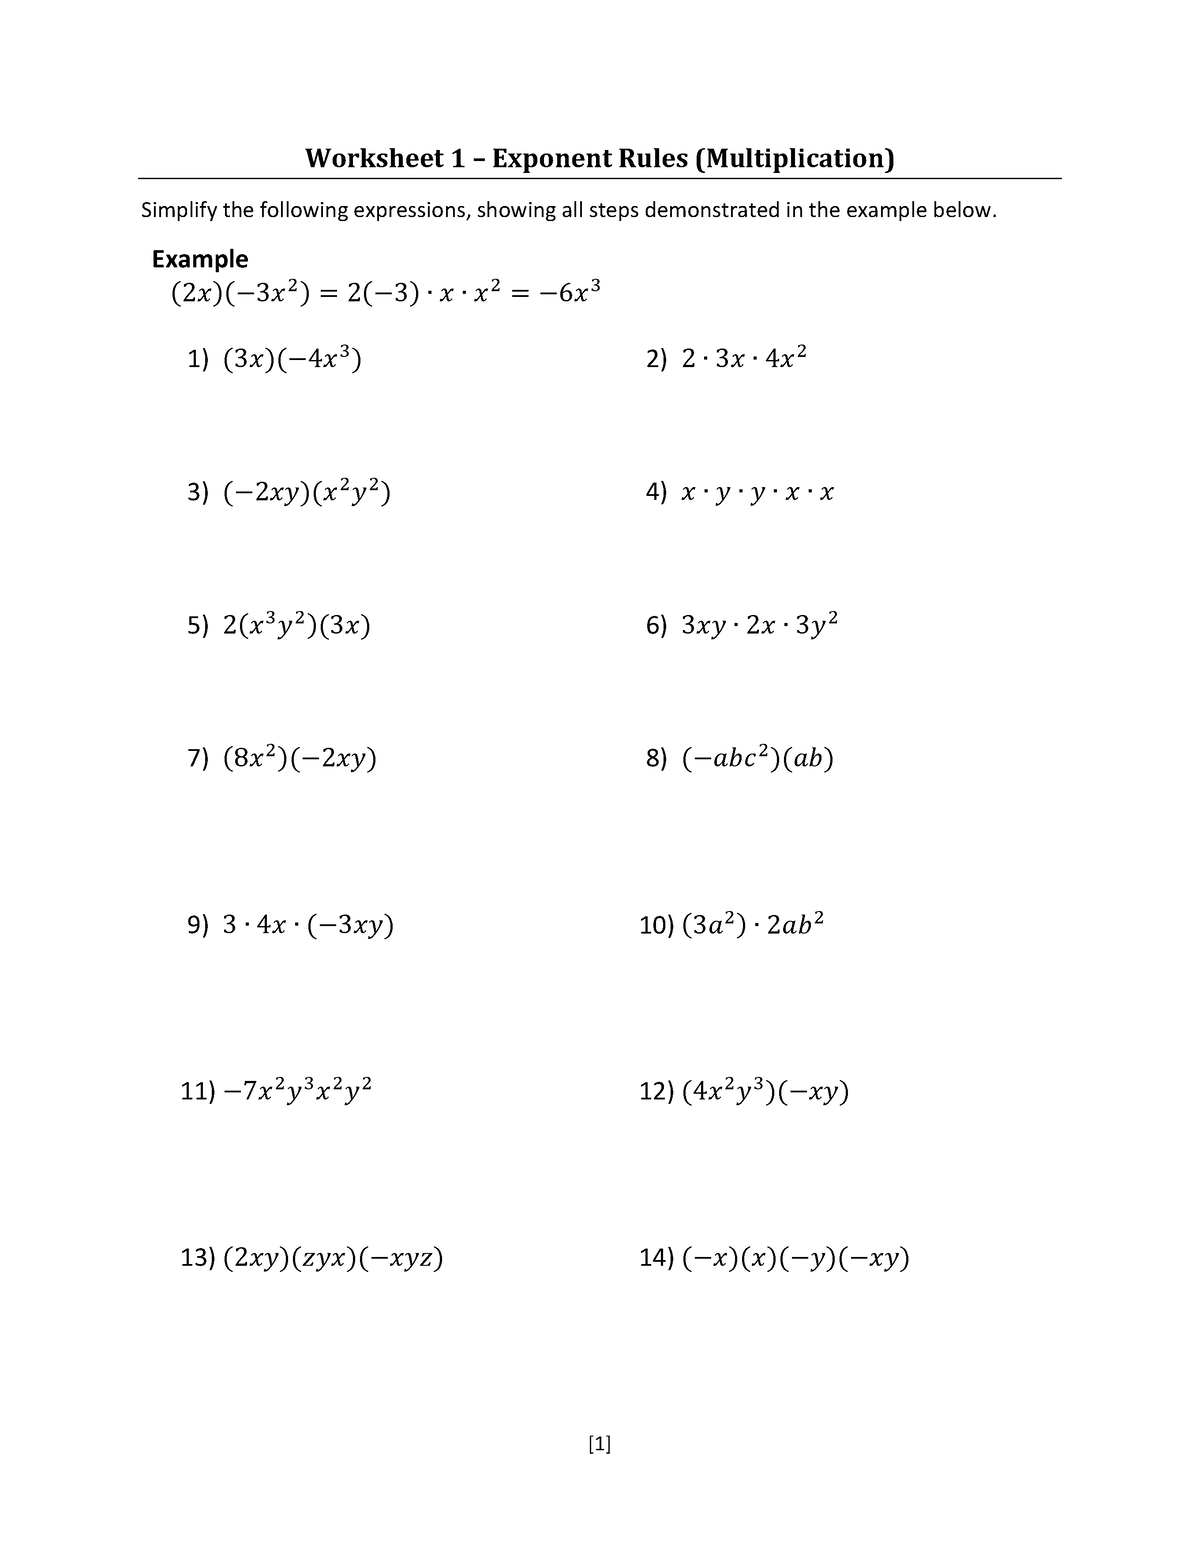 Worksheets - Week 2 - Exponent Rules - Worksheet 1 – Exponent Rules ...